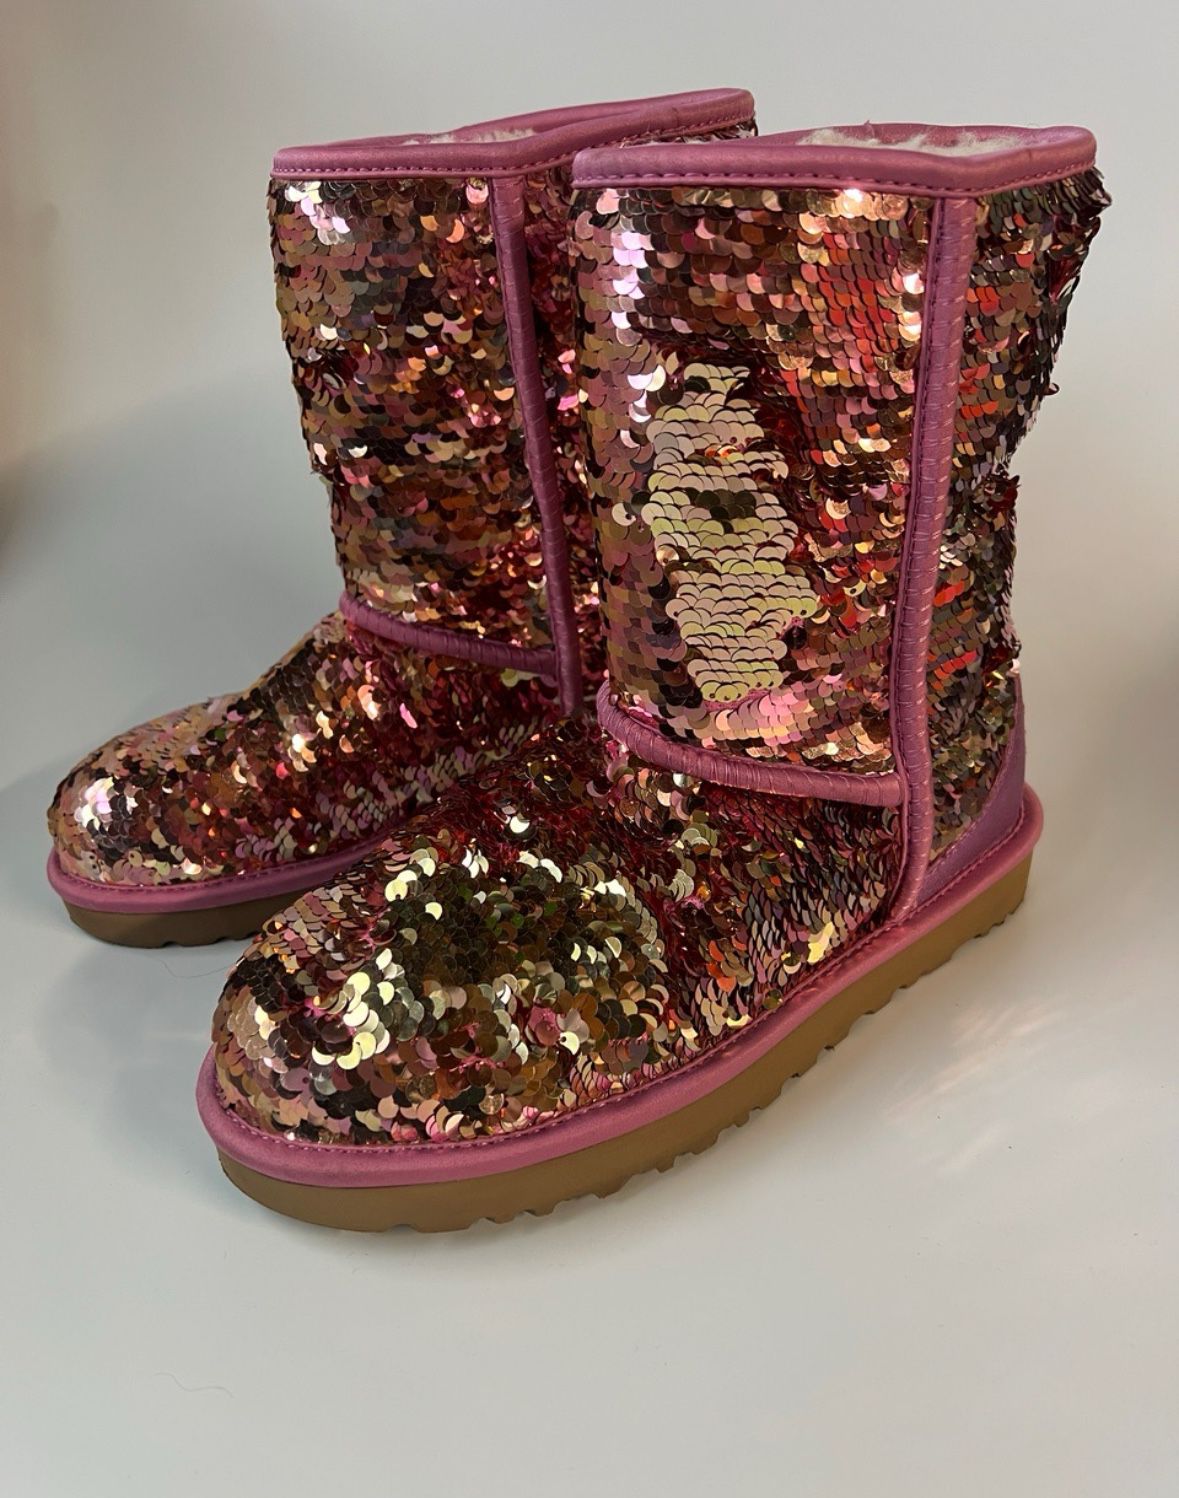 Women’s Ugg Classic Short Sequin Pink Boots Size 7 Like New